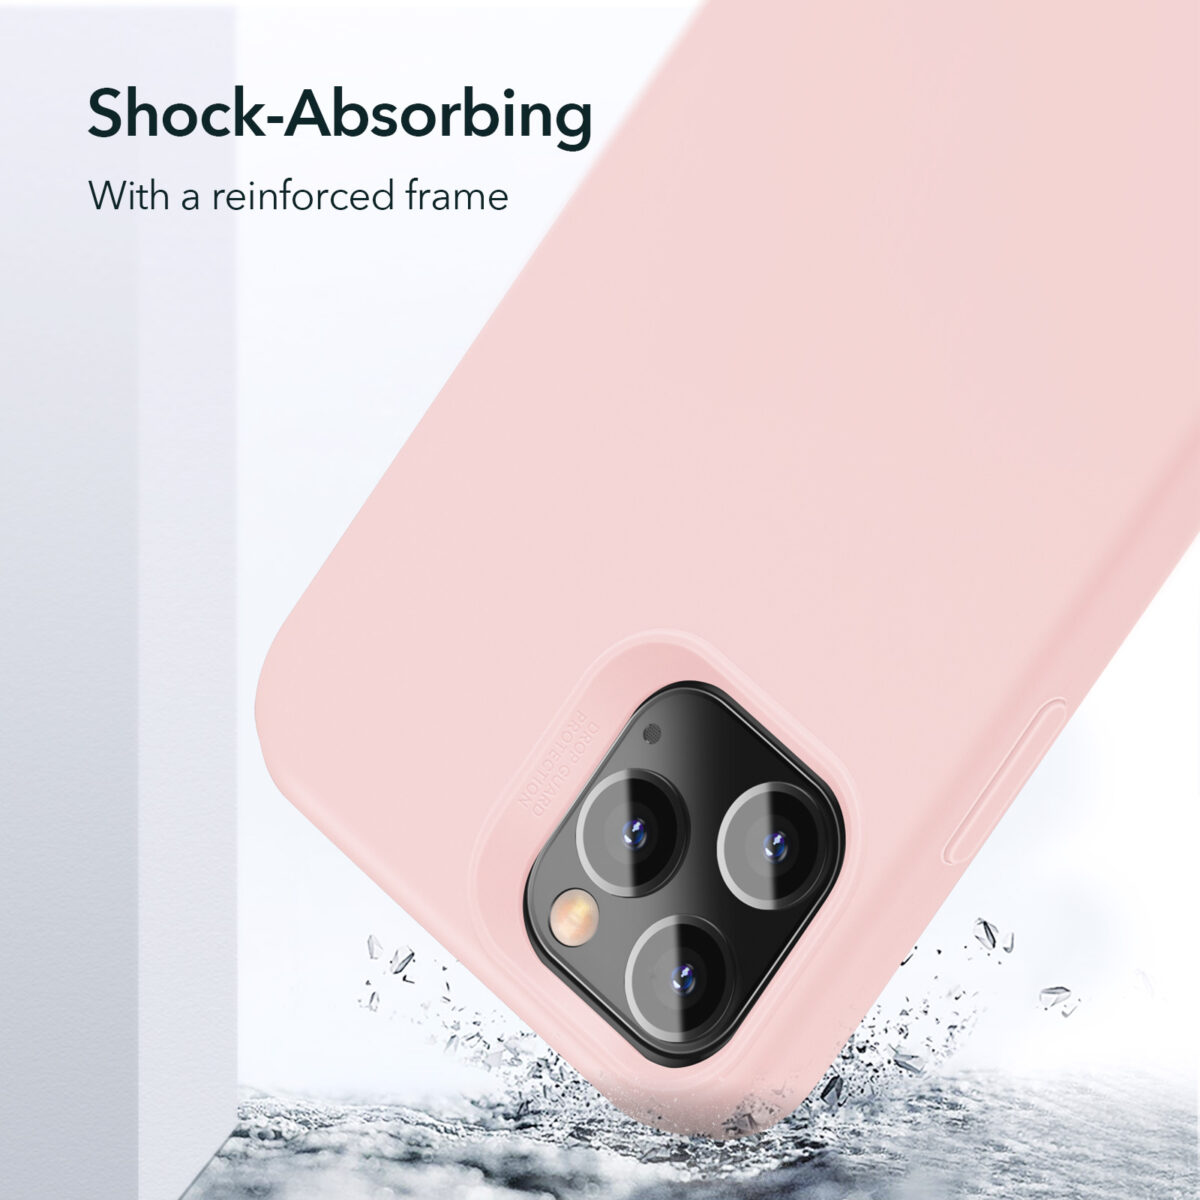 ESR Soft Silicone Case with a reinforced frame Sand Pink for iPhone 12 Pro Max